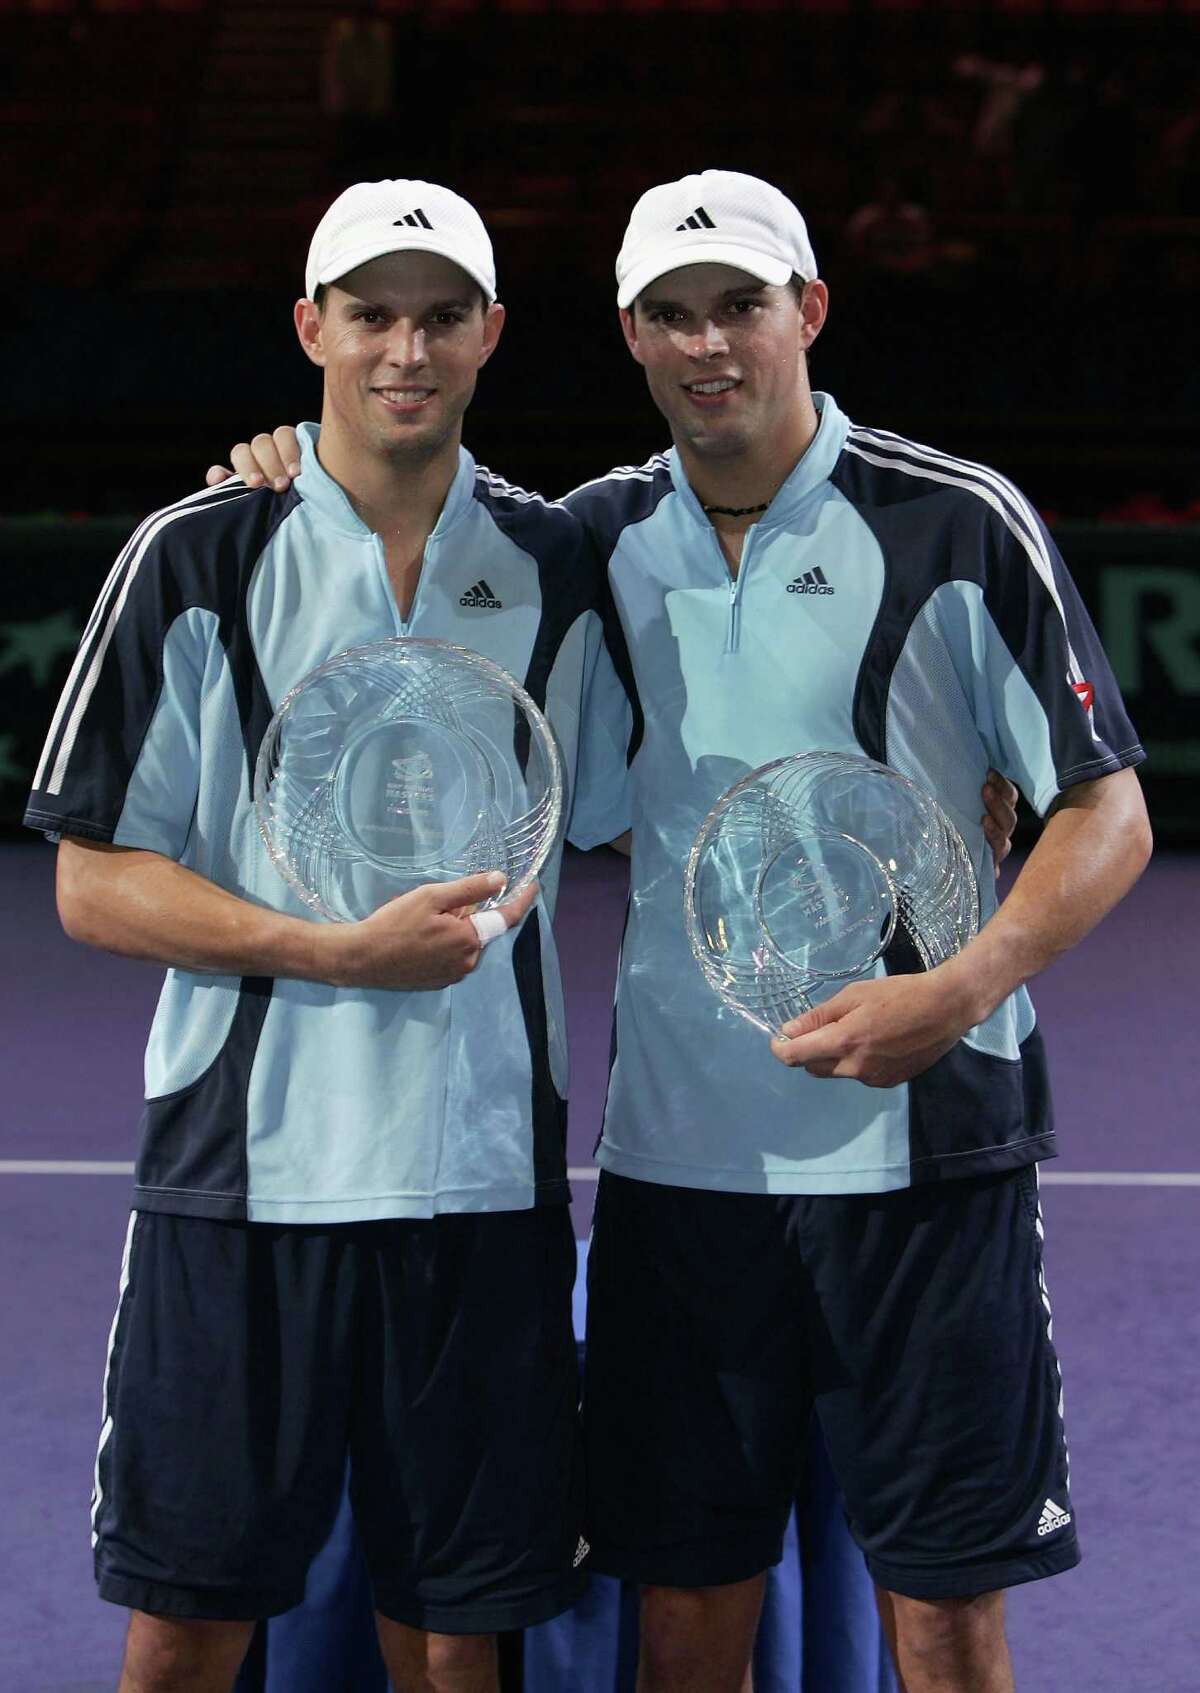 PARIS - NOVEMBER 6: Bob and Mike Bryan of the USA hold their trophies after victory against Mark Knowles of the Bahamas and Daniel Nestor of Canada in the final ,during the BNP Paribas ATP Masters Series at the Palais Omnisports Paris-Bercy, November 6, 2005 in Paris, France. (Photo by Clive Brunskill/Getty Images) *** Local Caption *** Bob Bryan;Mike Bryan